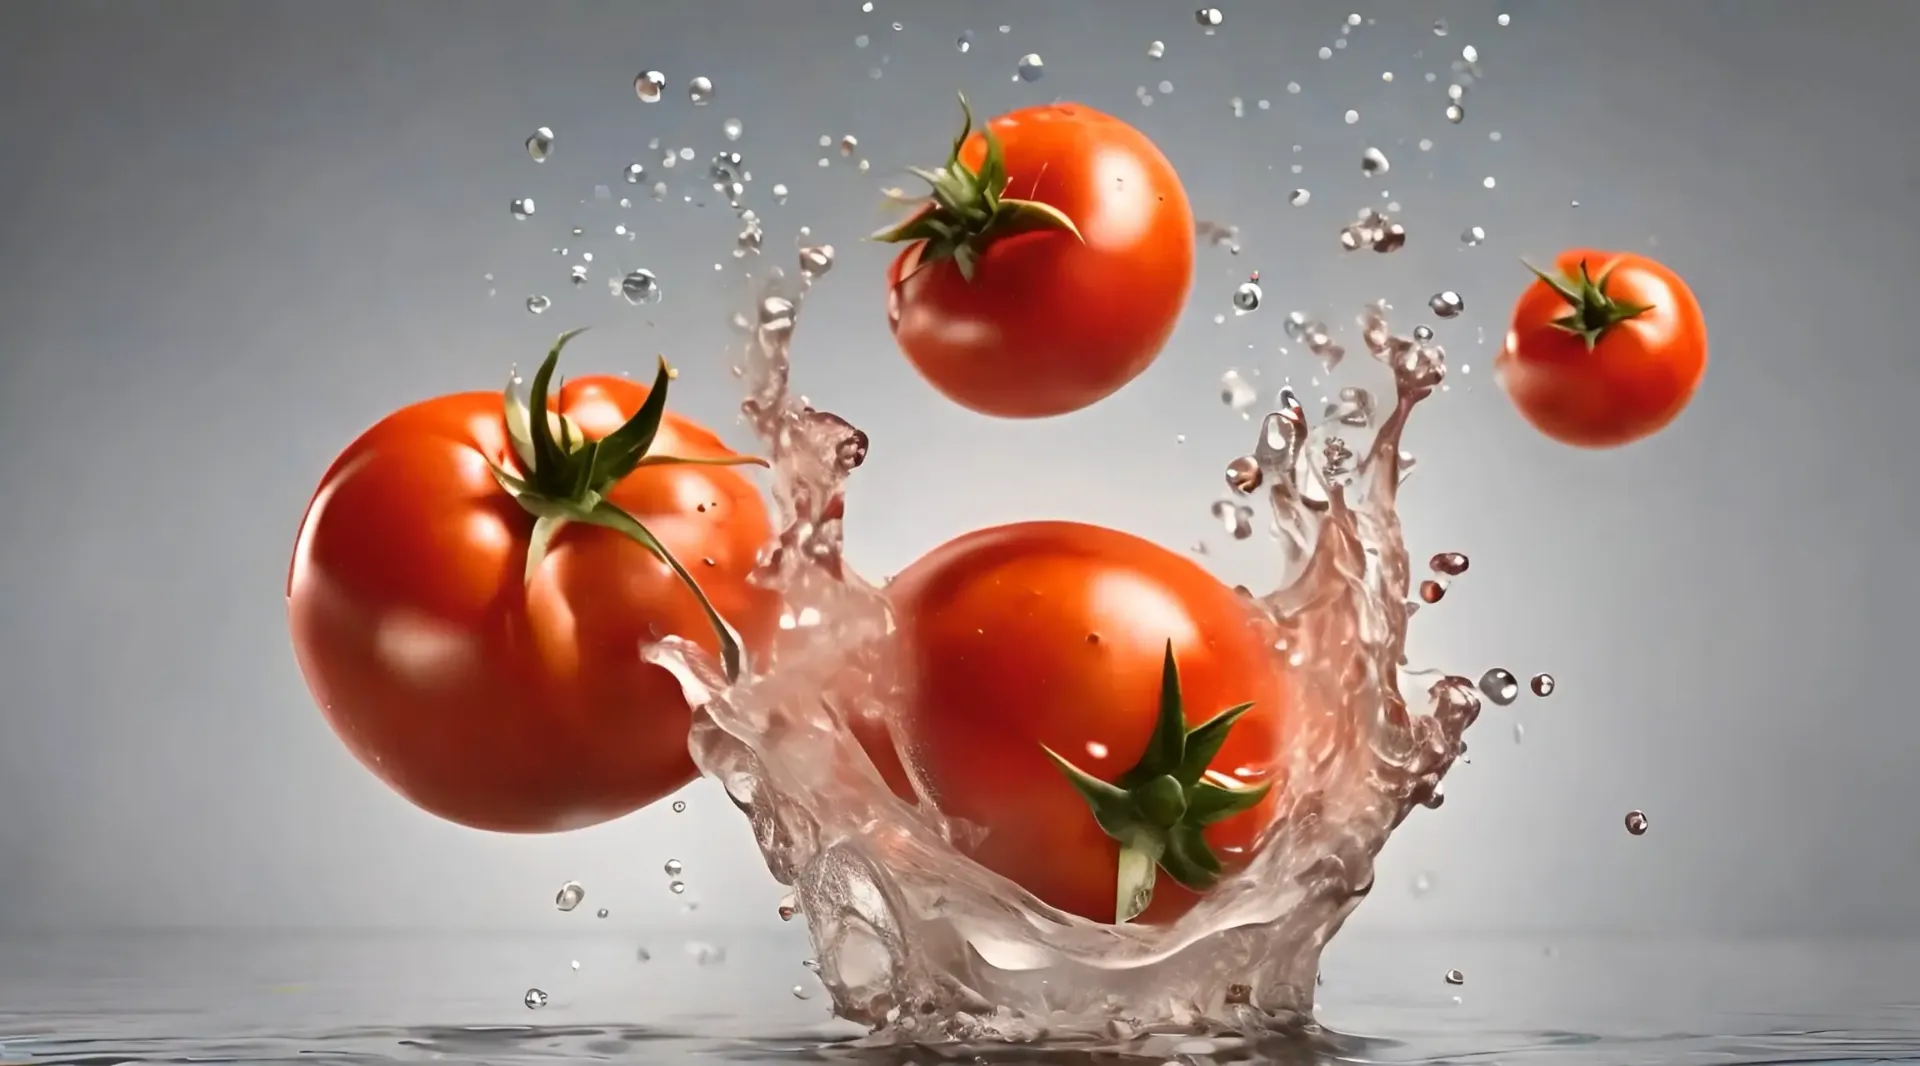 Ripe Tomatoes Dropping into Water Cinematic Video Clip